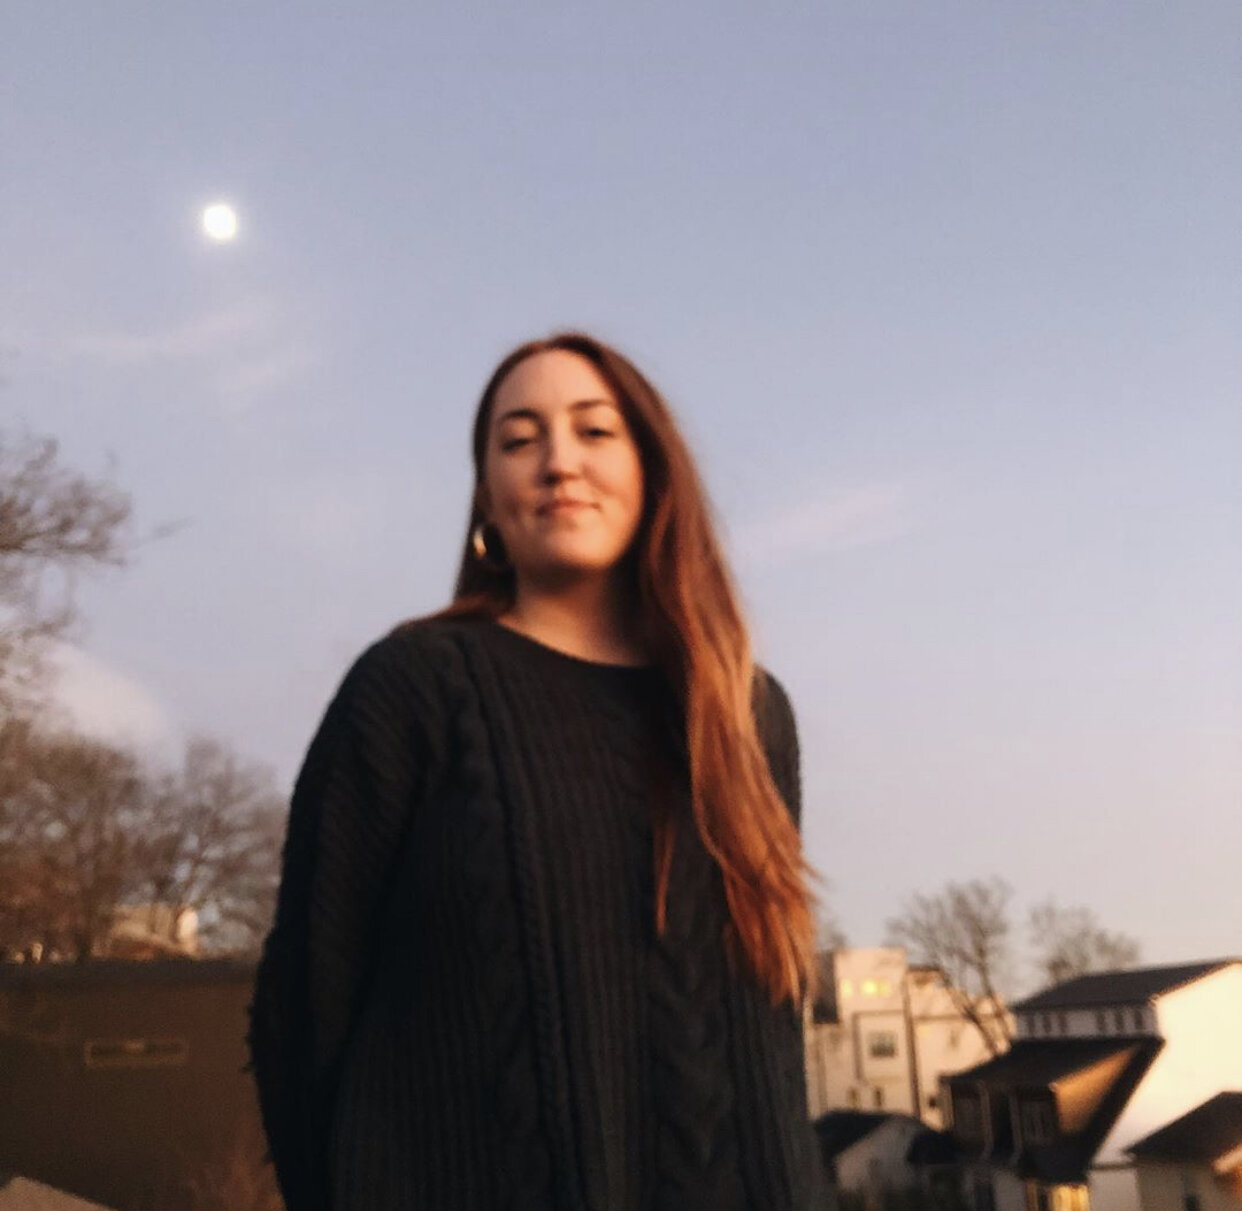 girl in sweater smiles at camera, moon shines behind her